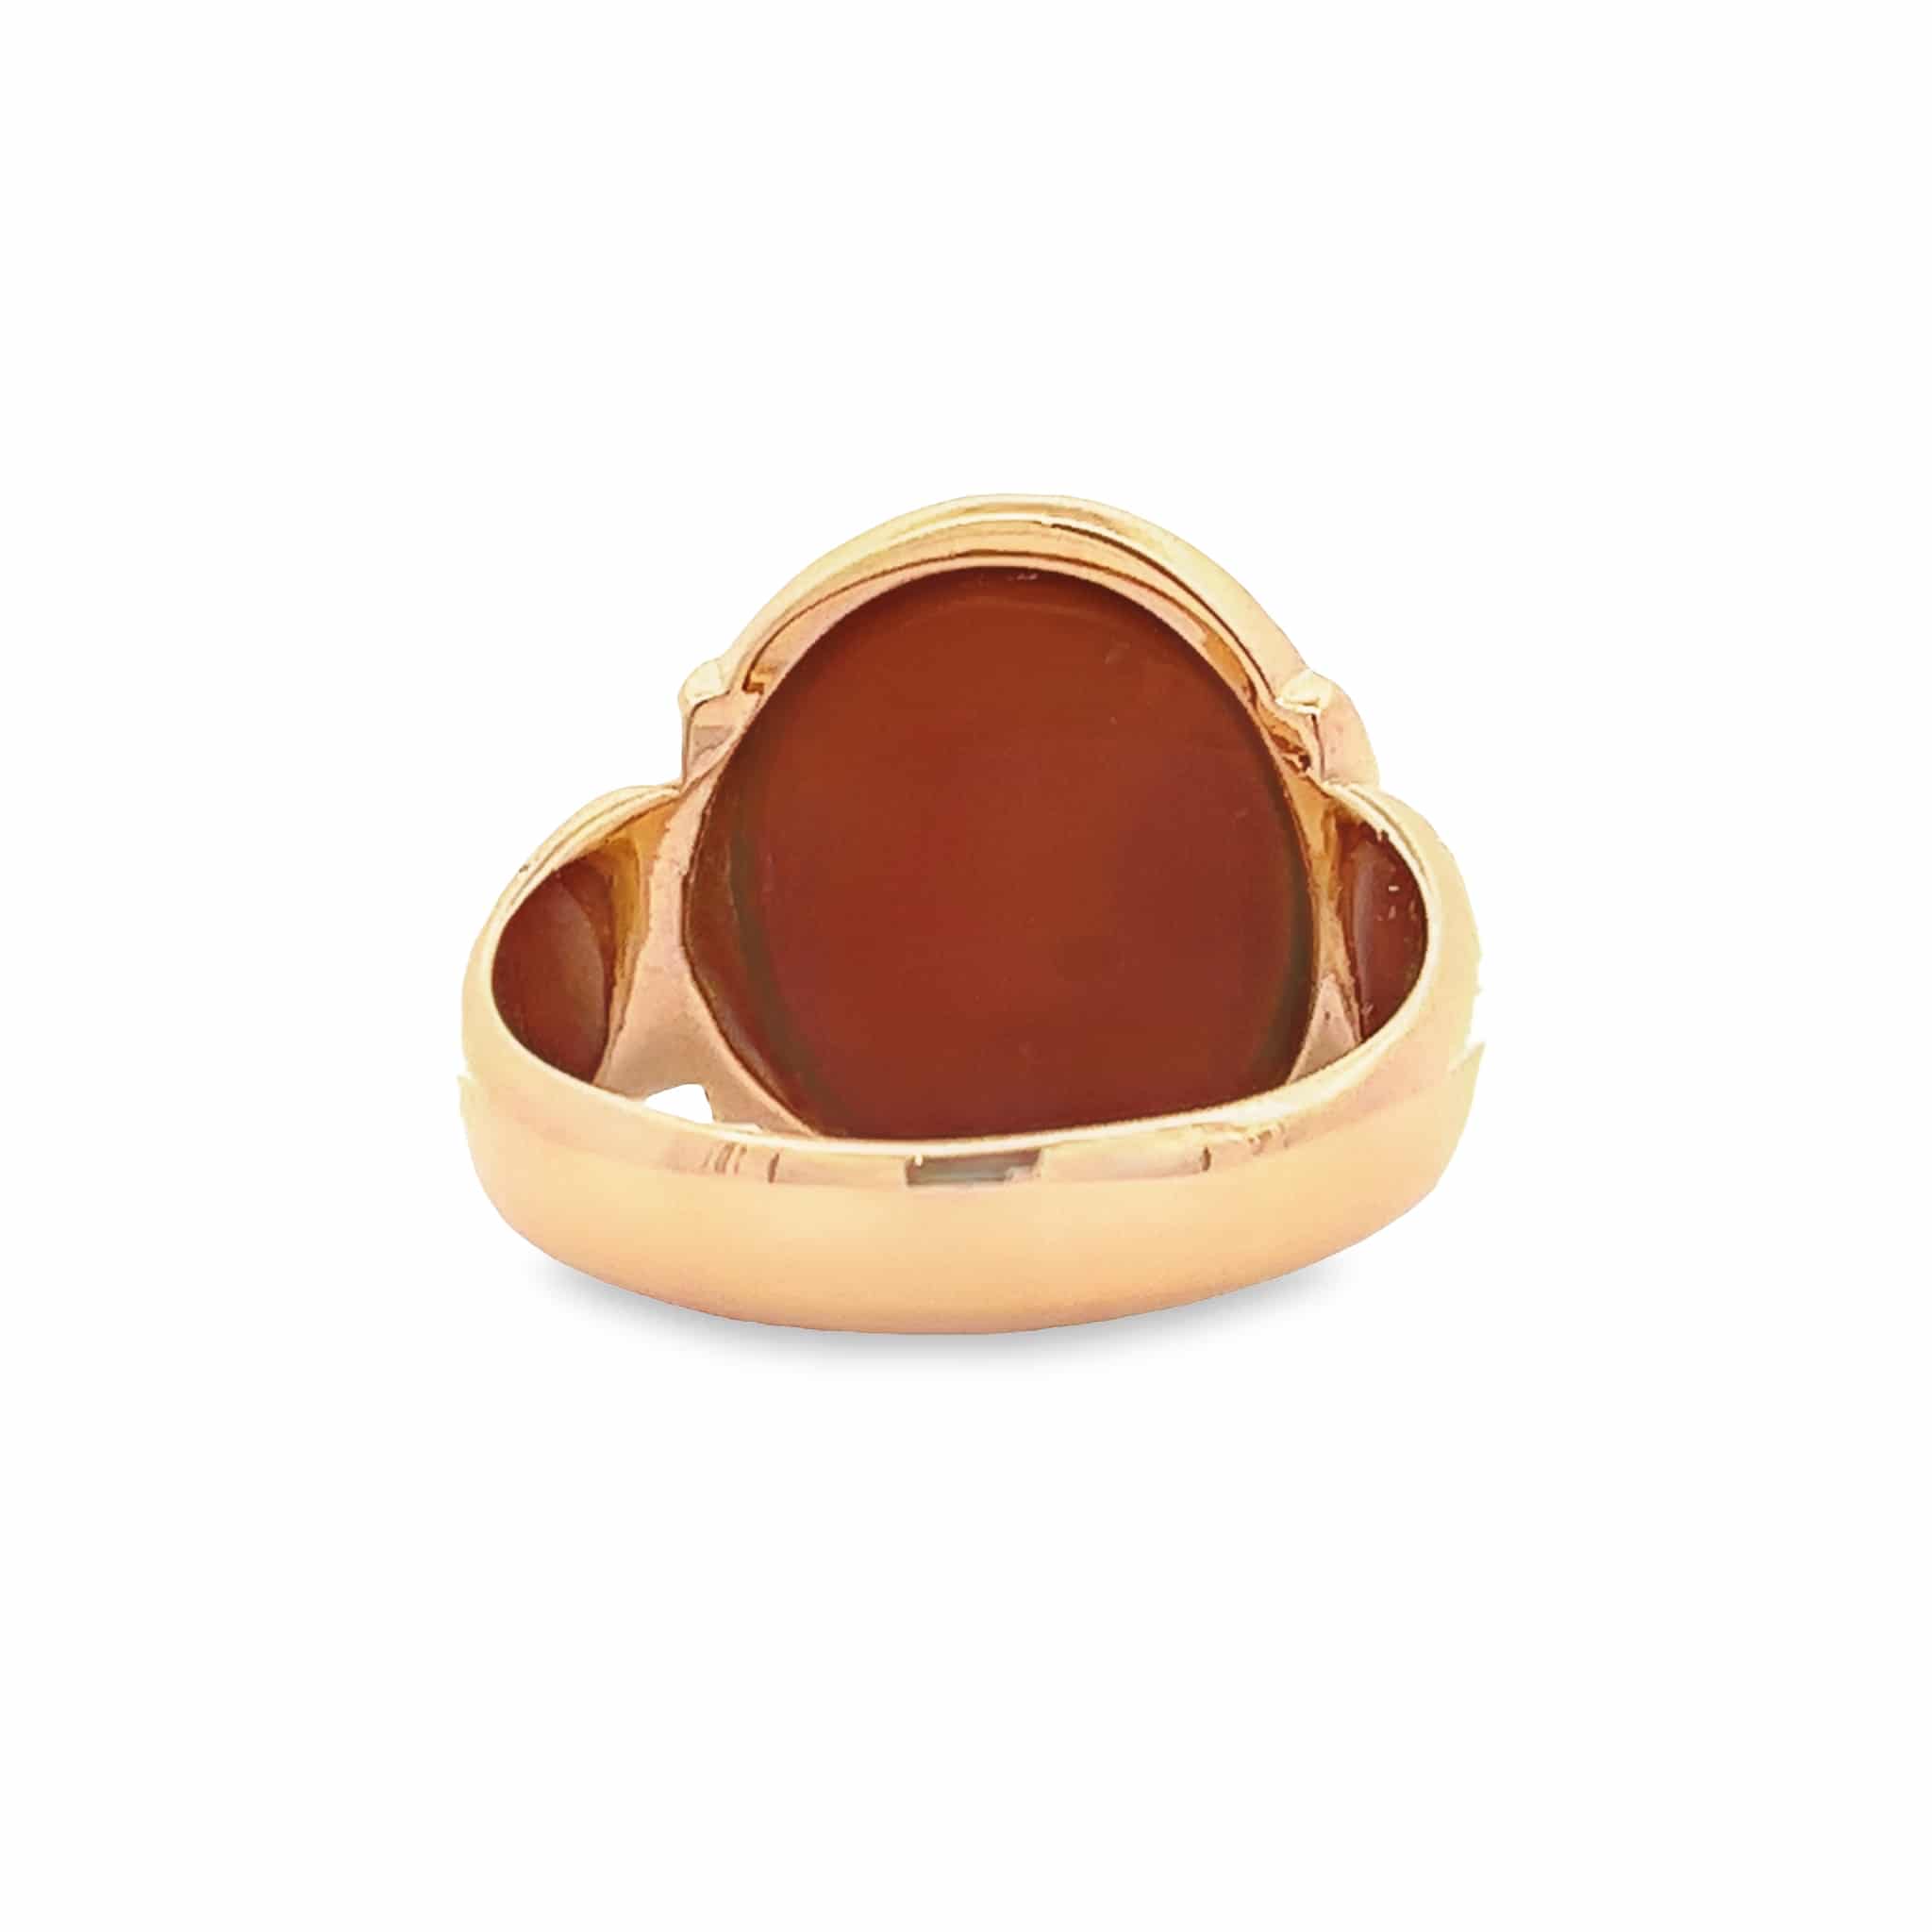 8gm 18ct Gold Gents Signet Ring with Oval Carnelian – Pre-Owned